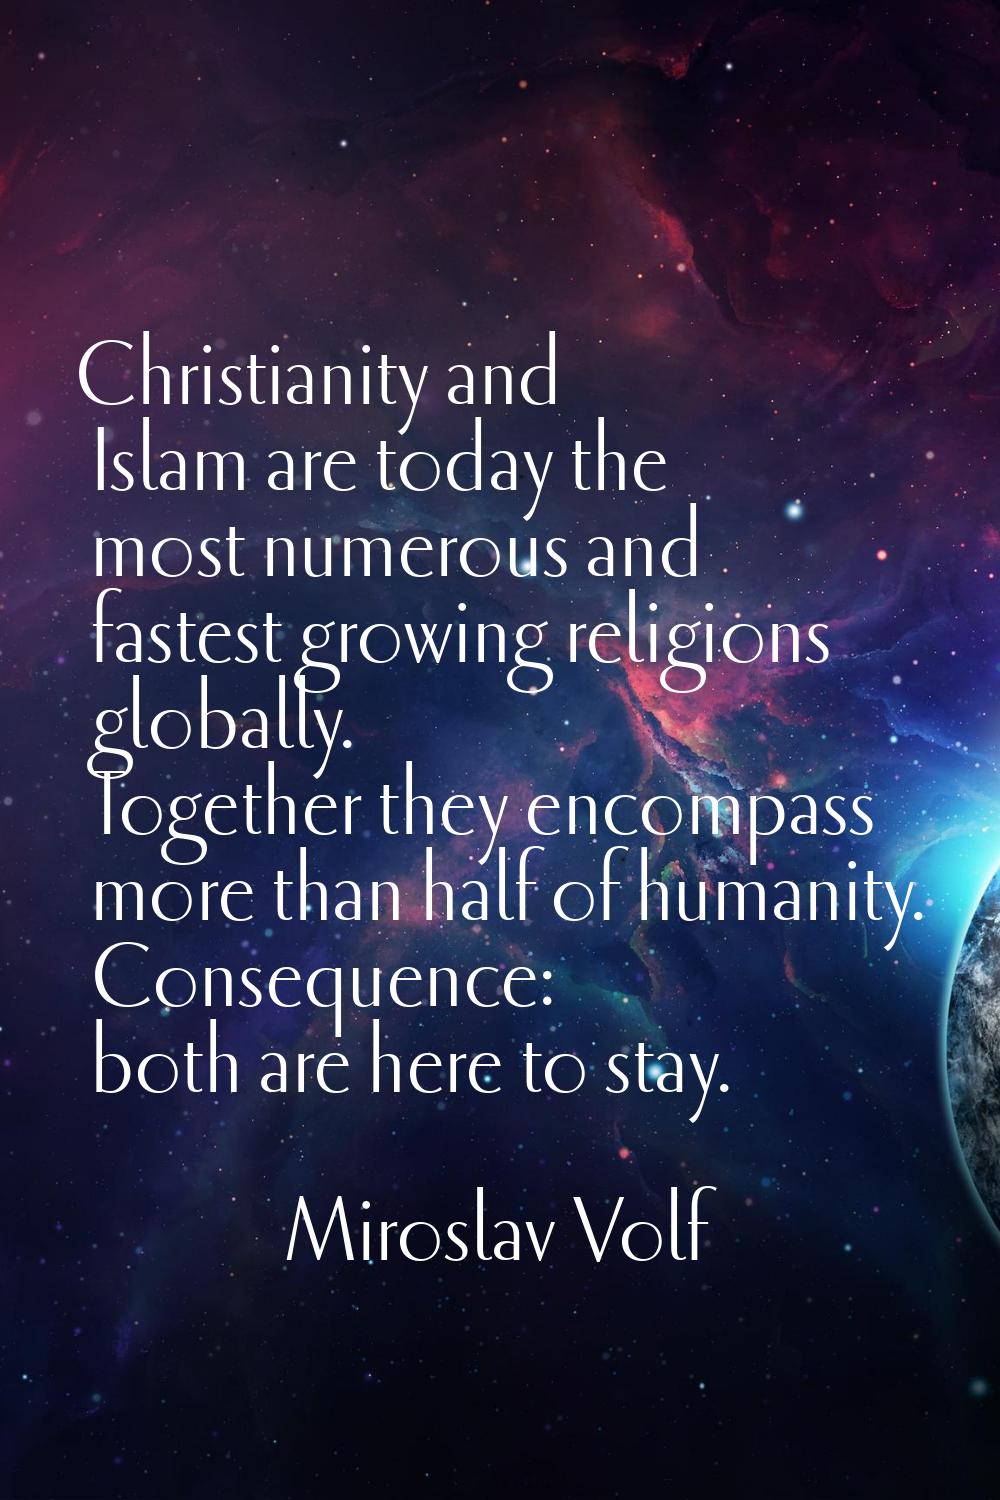 Christianity and Islam are today the most numerous and fastest growing religions globally. Together